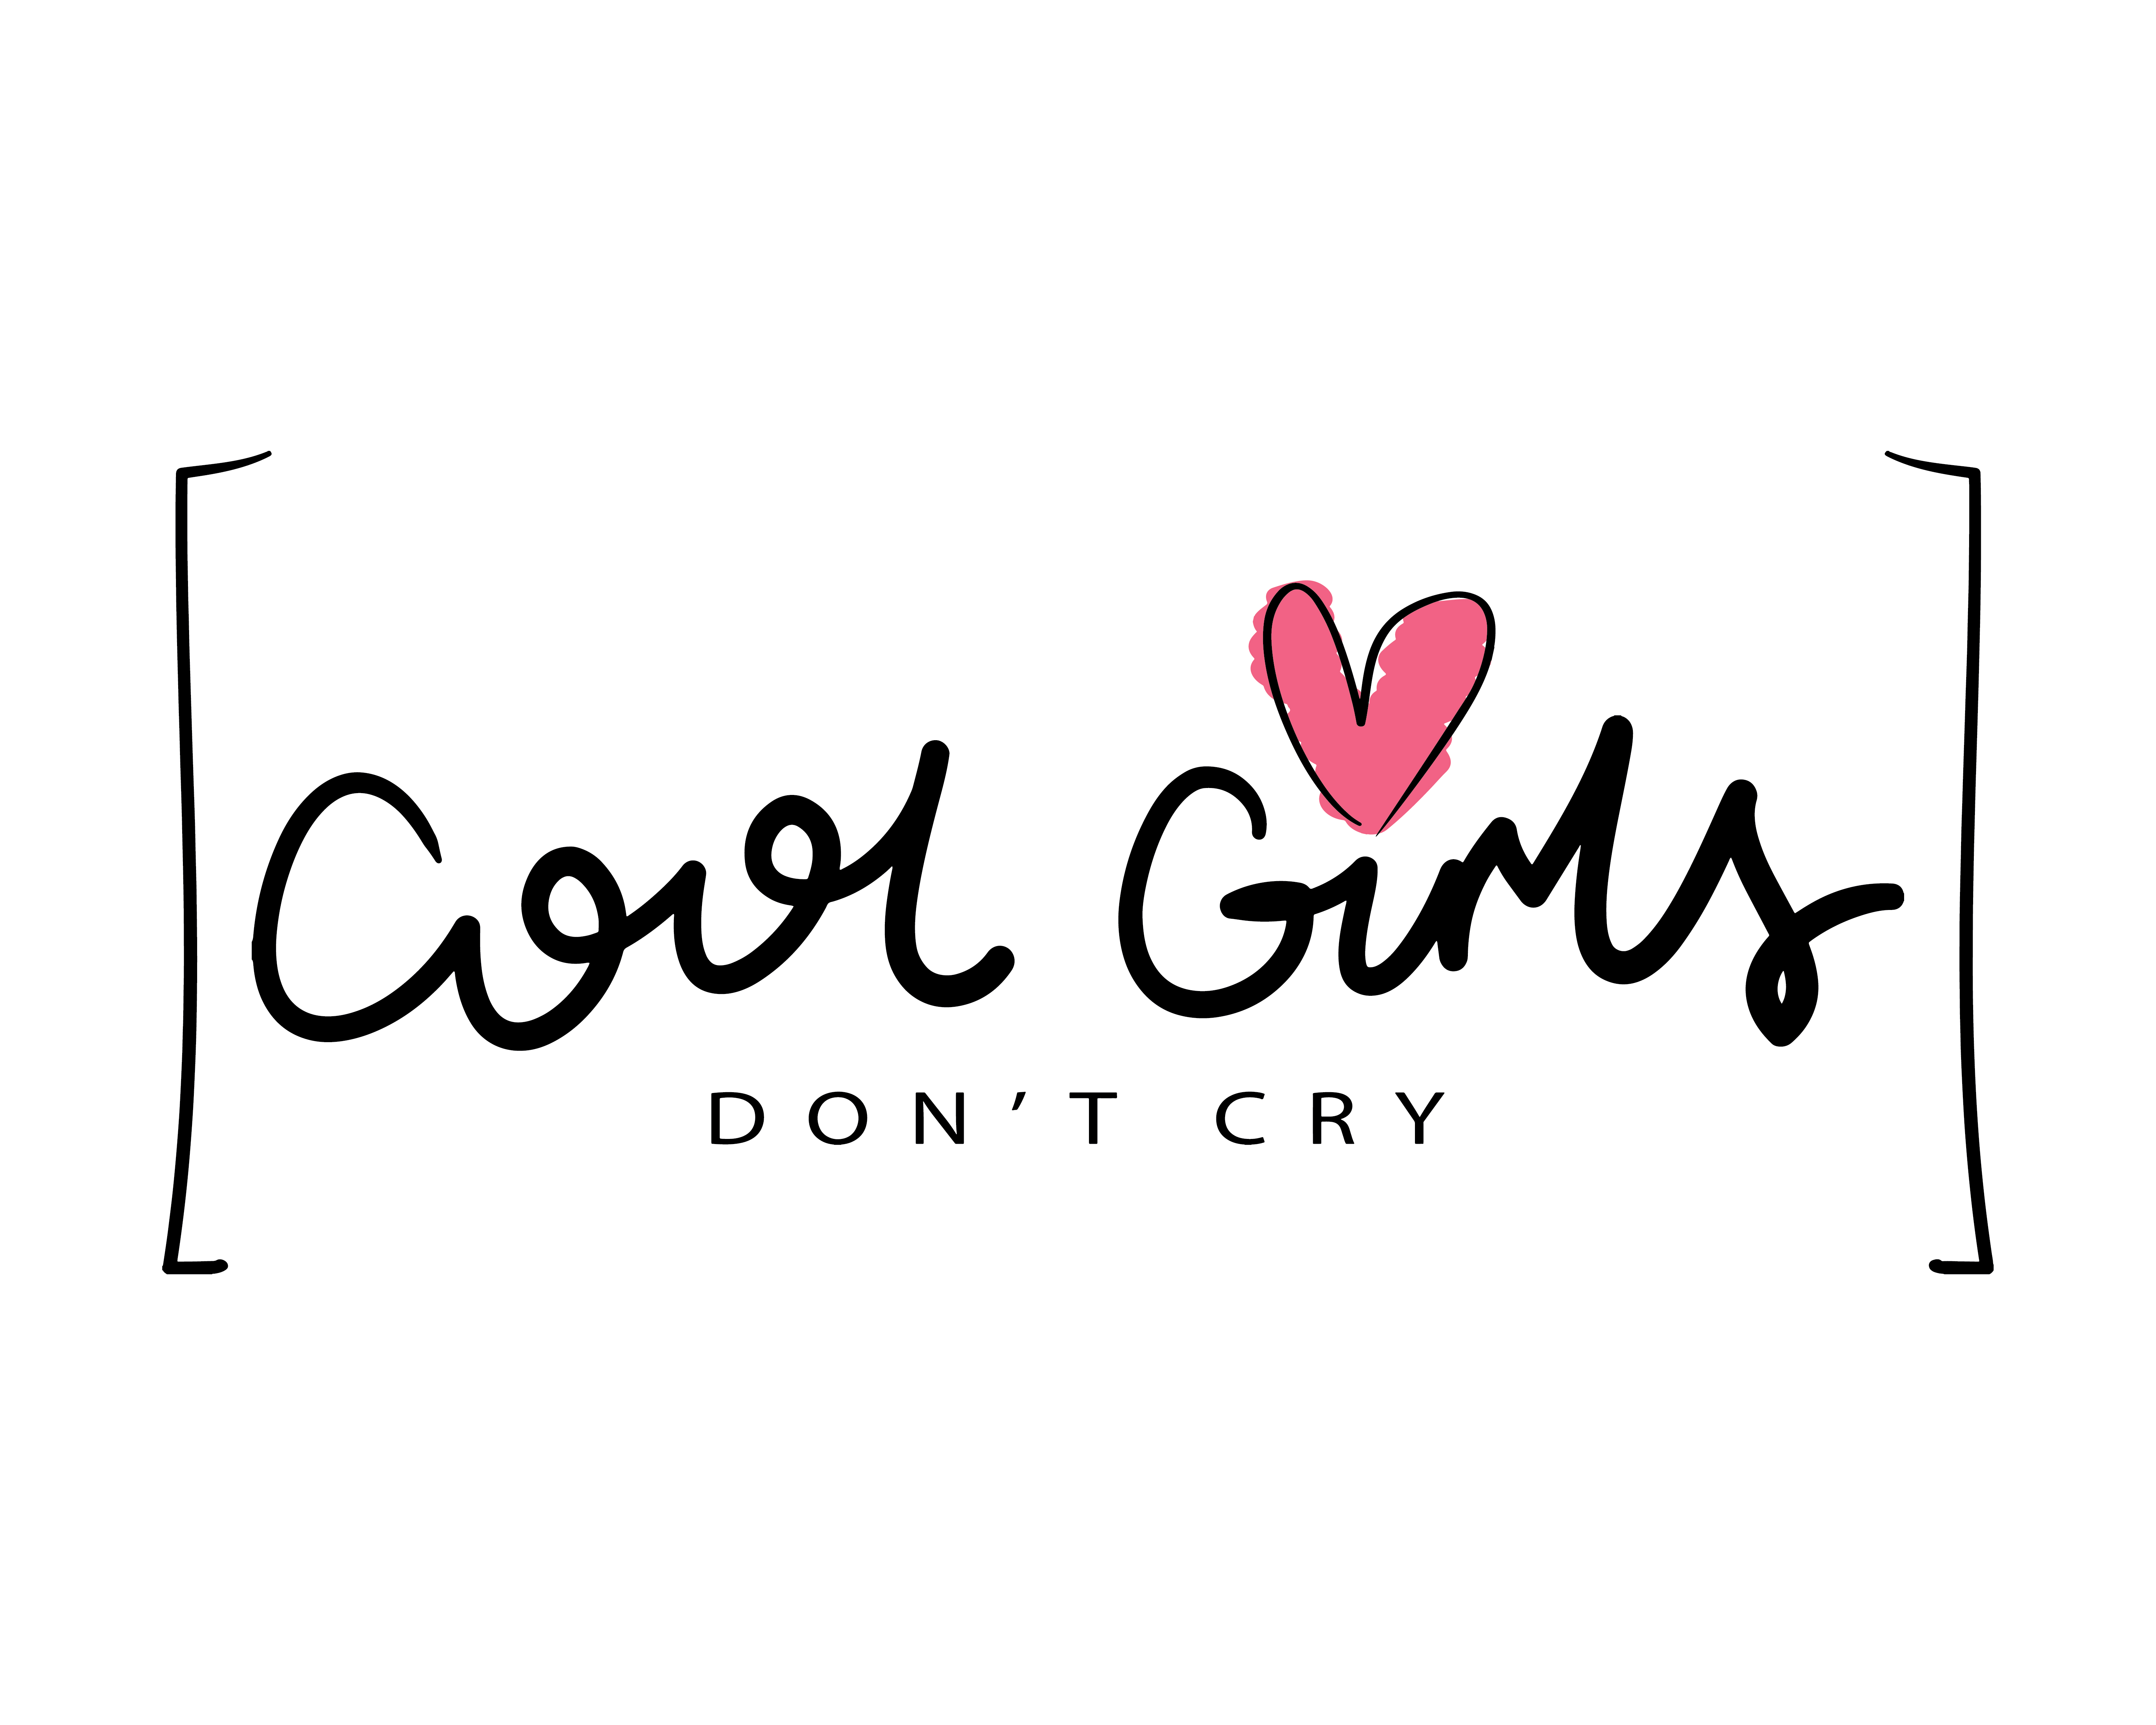 Download Cool girls don't cry inspirational girl power quote ...